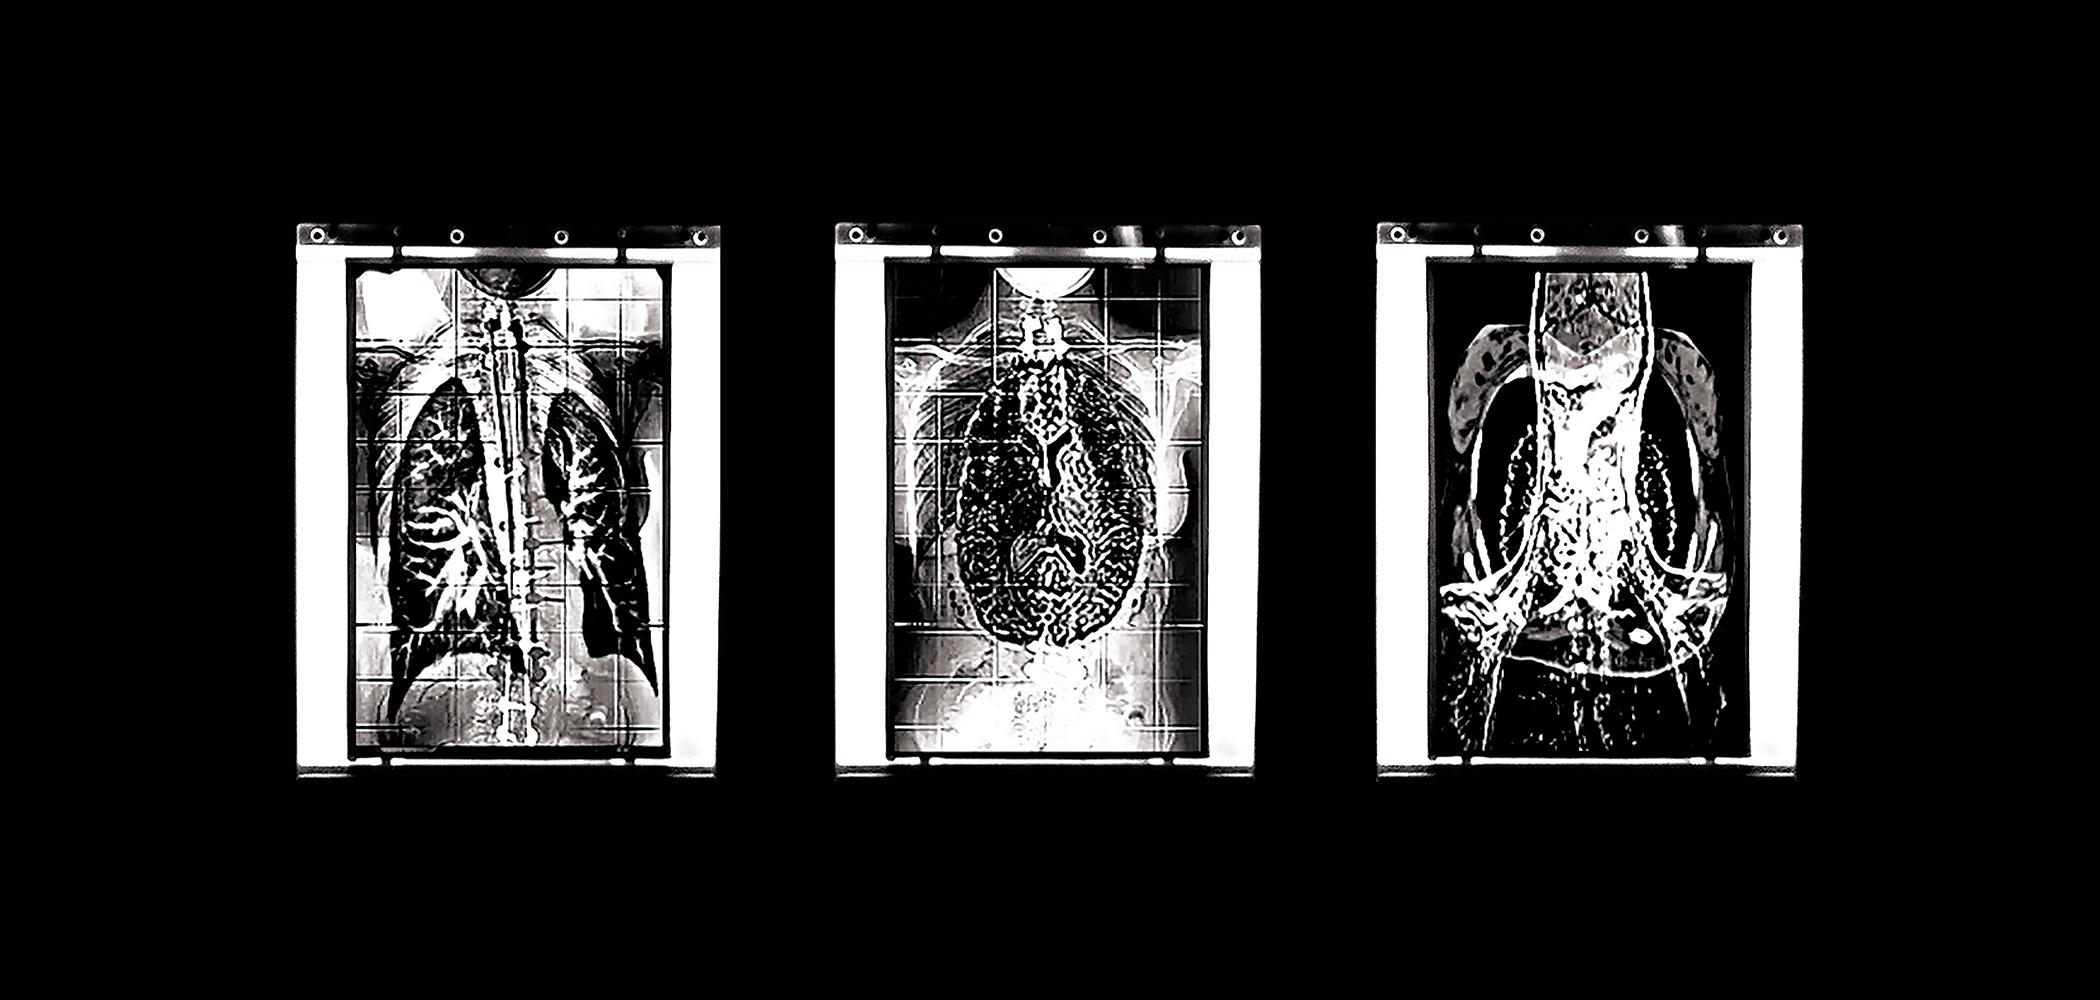 A triptych photograph captures a bio-transmedia art installation and hacked medical lightbox, sequentially exhibiting a fragmented and superimposed rendition of the author’s X-rays and MRI scans, defying clinical interpretation.